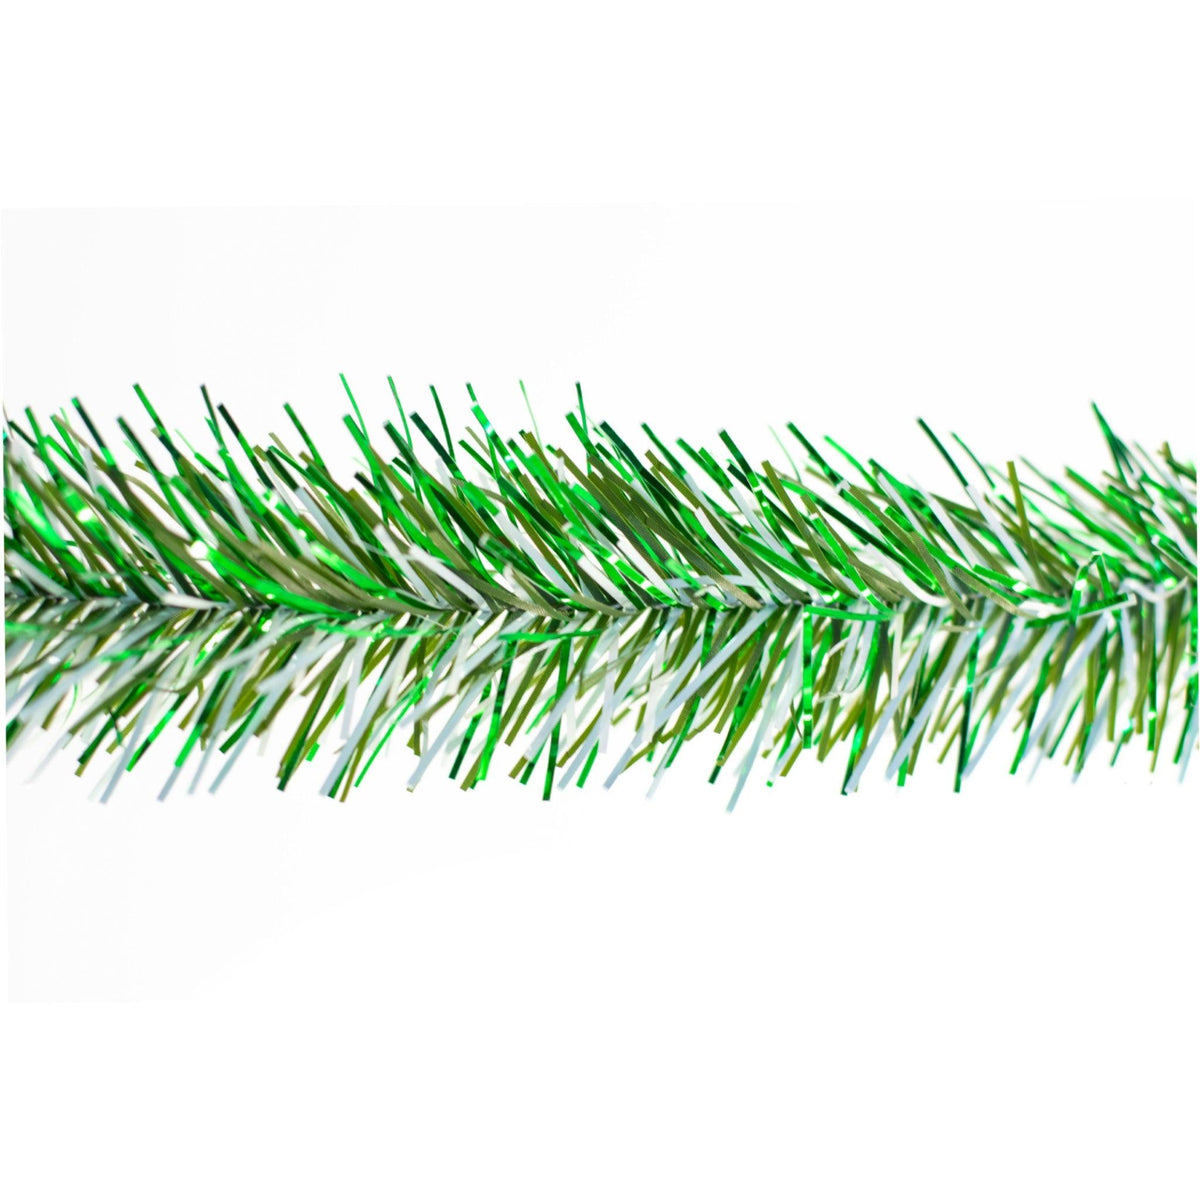 Lee Display's brand new 25ft Alpine Green and White Tinsel Garlands and Fringe Embellishments on sale at leedisplay.com